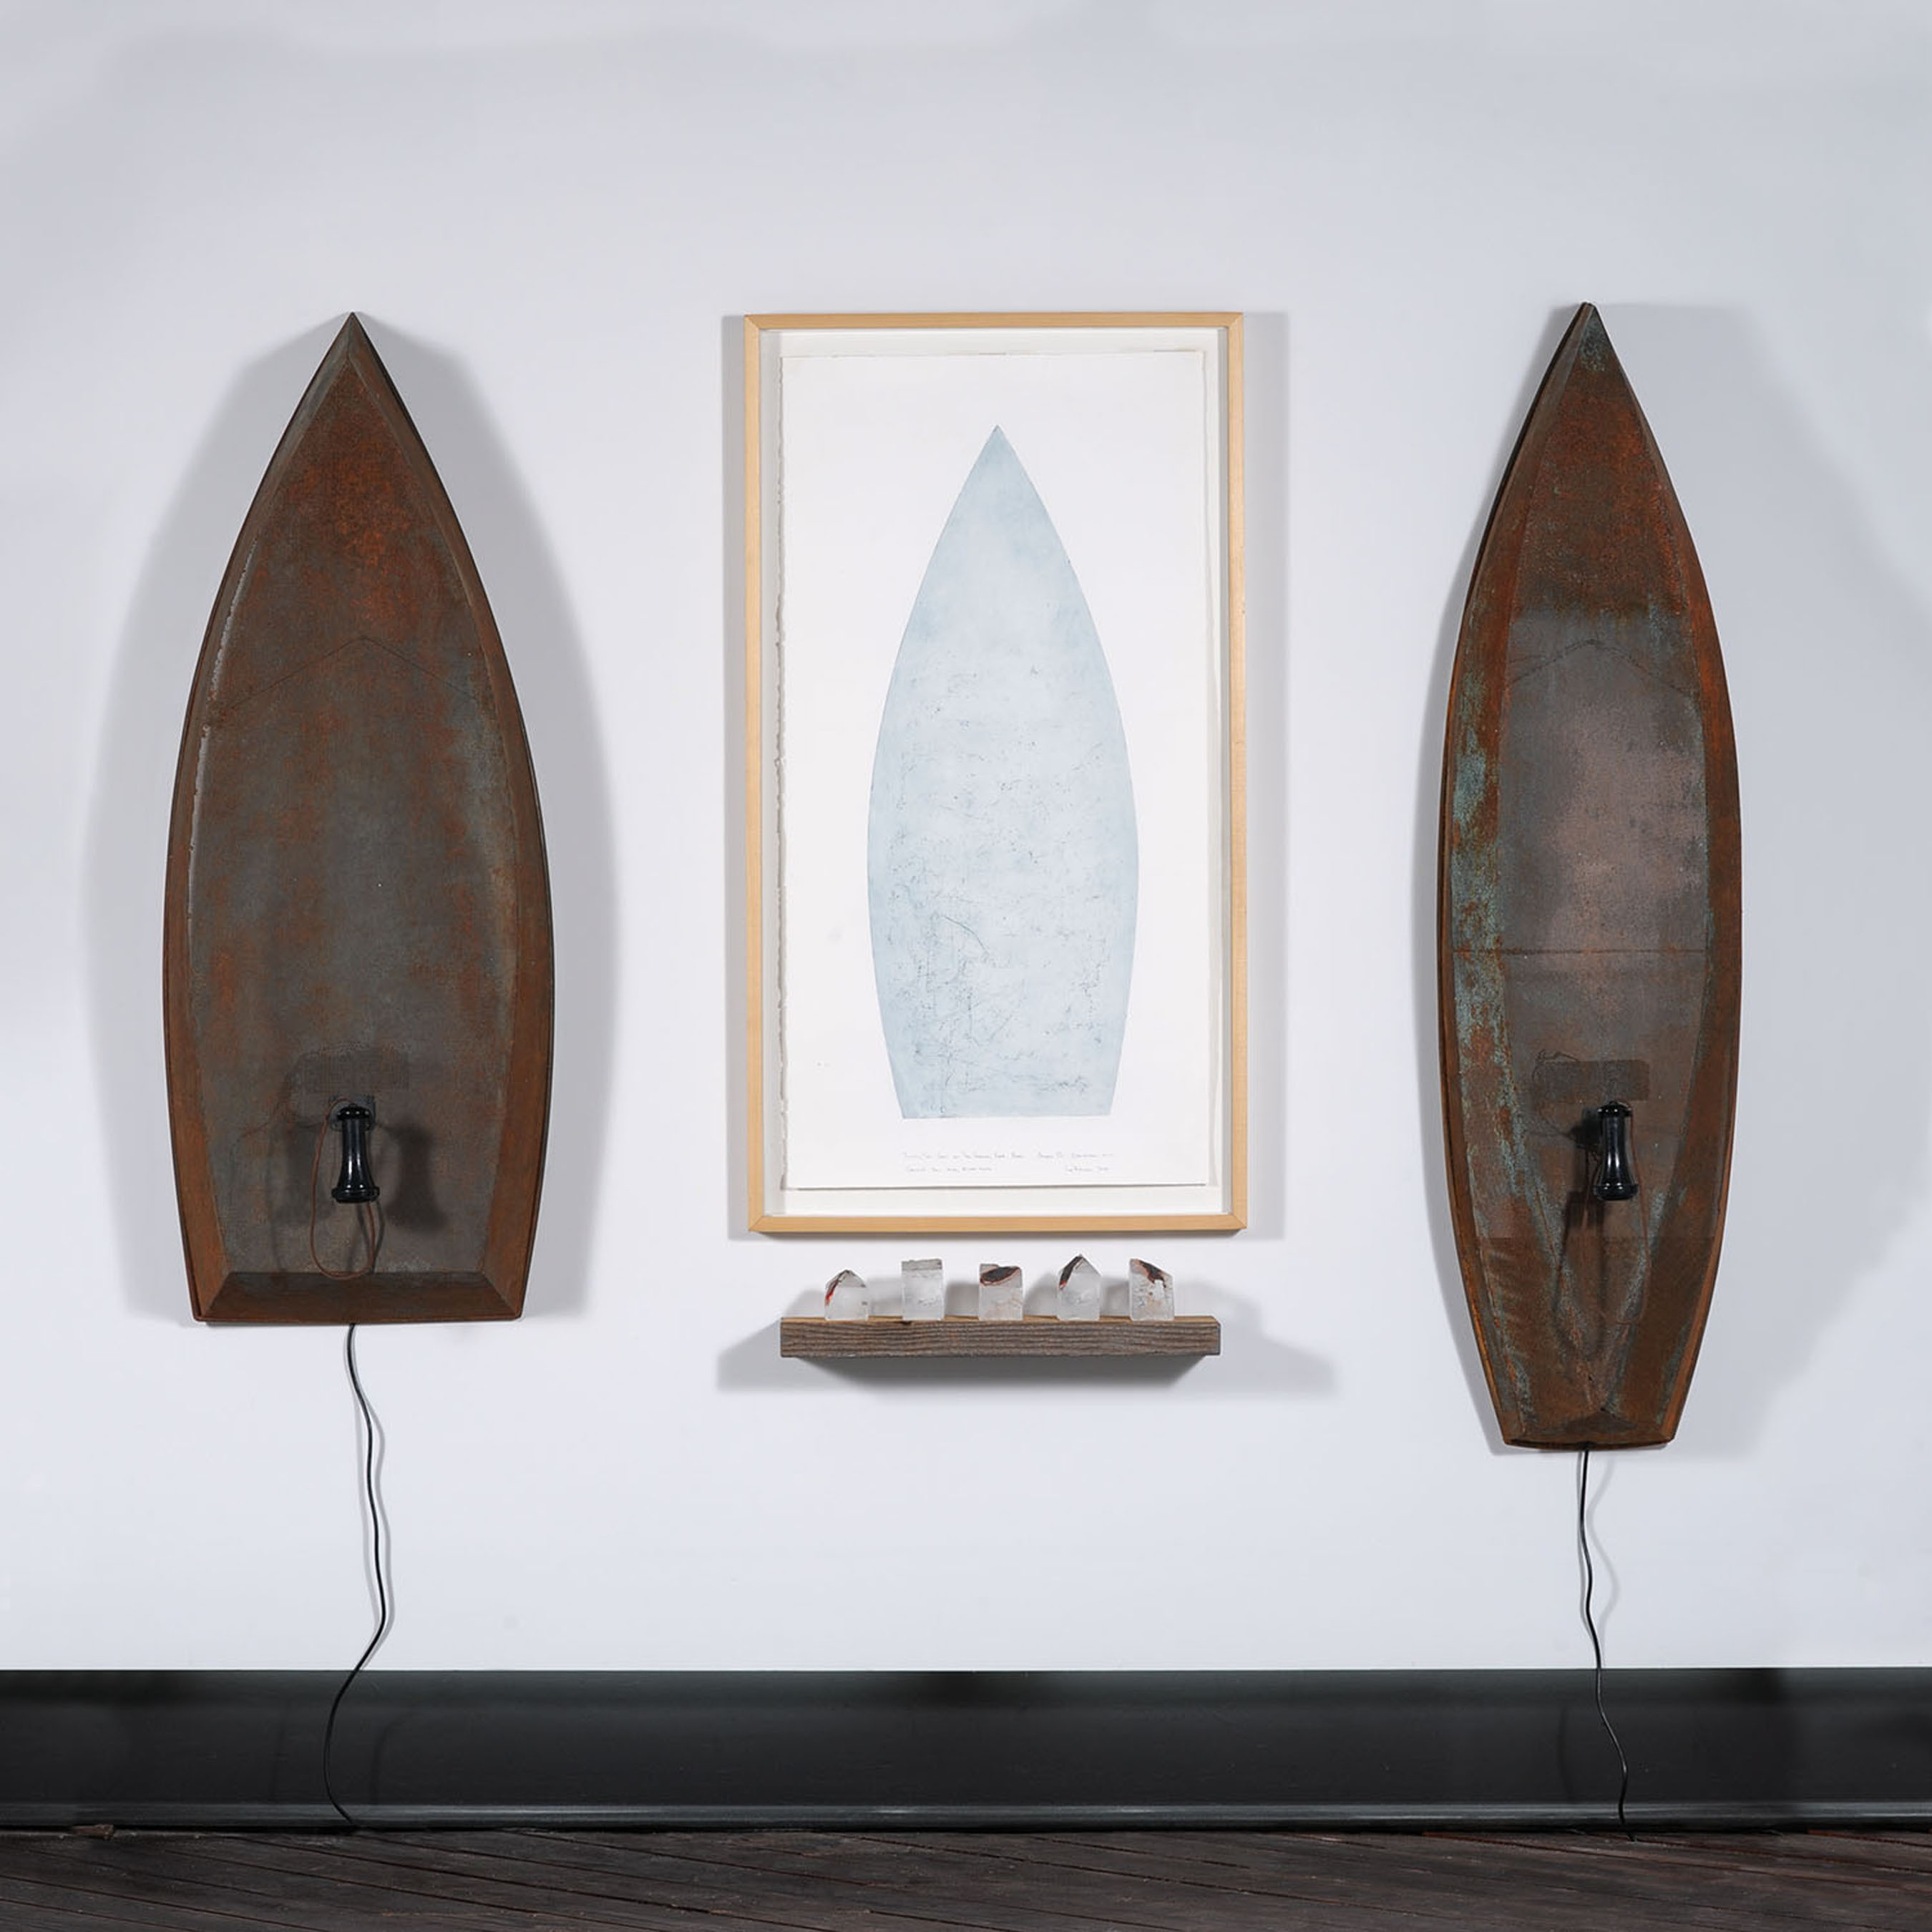 Skiff/Trow interactive boat sculptures. Viewer hears roaring river. Print made by river rocks on copper plate. Cast glass houses of copper and wood all by Lawrence LaBianca, photo by Tom Grotta. (PRNewsFoto/browngrotta arts, Tom Grotta) (PRNewsFoto/BROWNGROTTA ARTS)